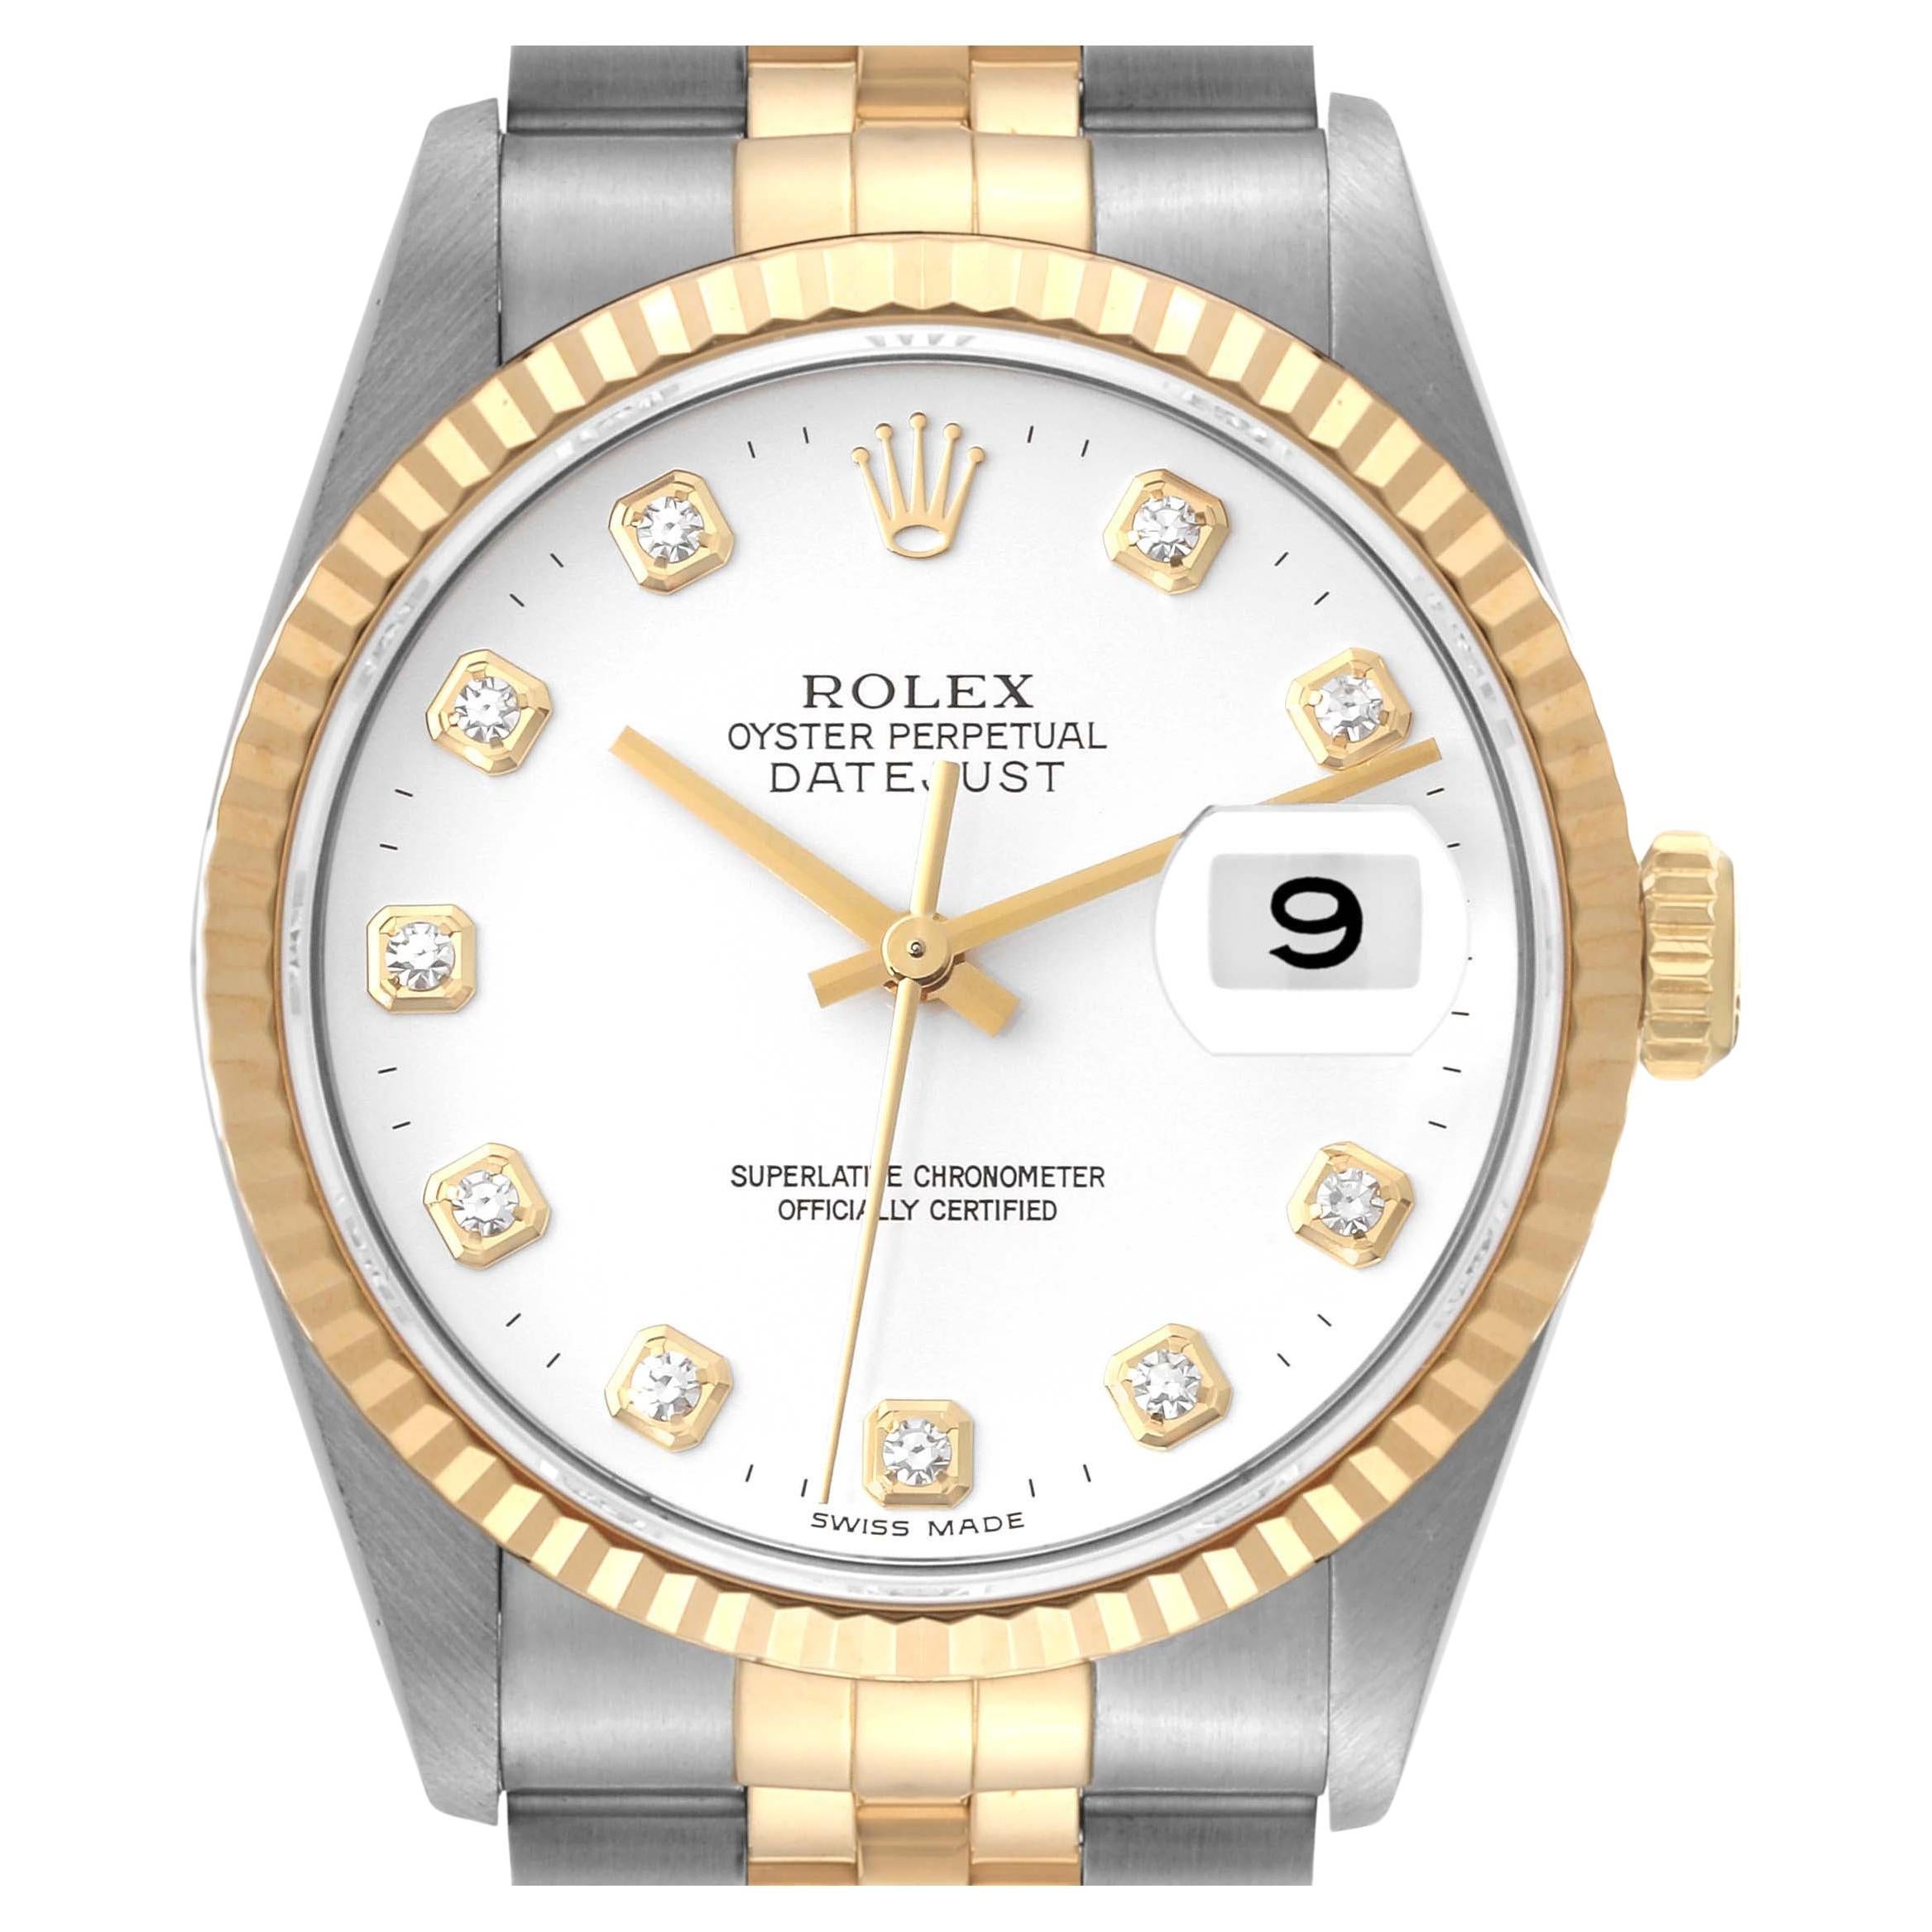 Rolex Datejust White Diamond Dial Steel Yellow Gold Mens Watch 16233 For Sale